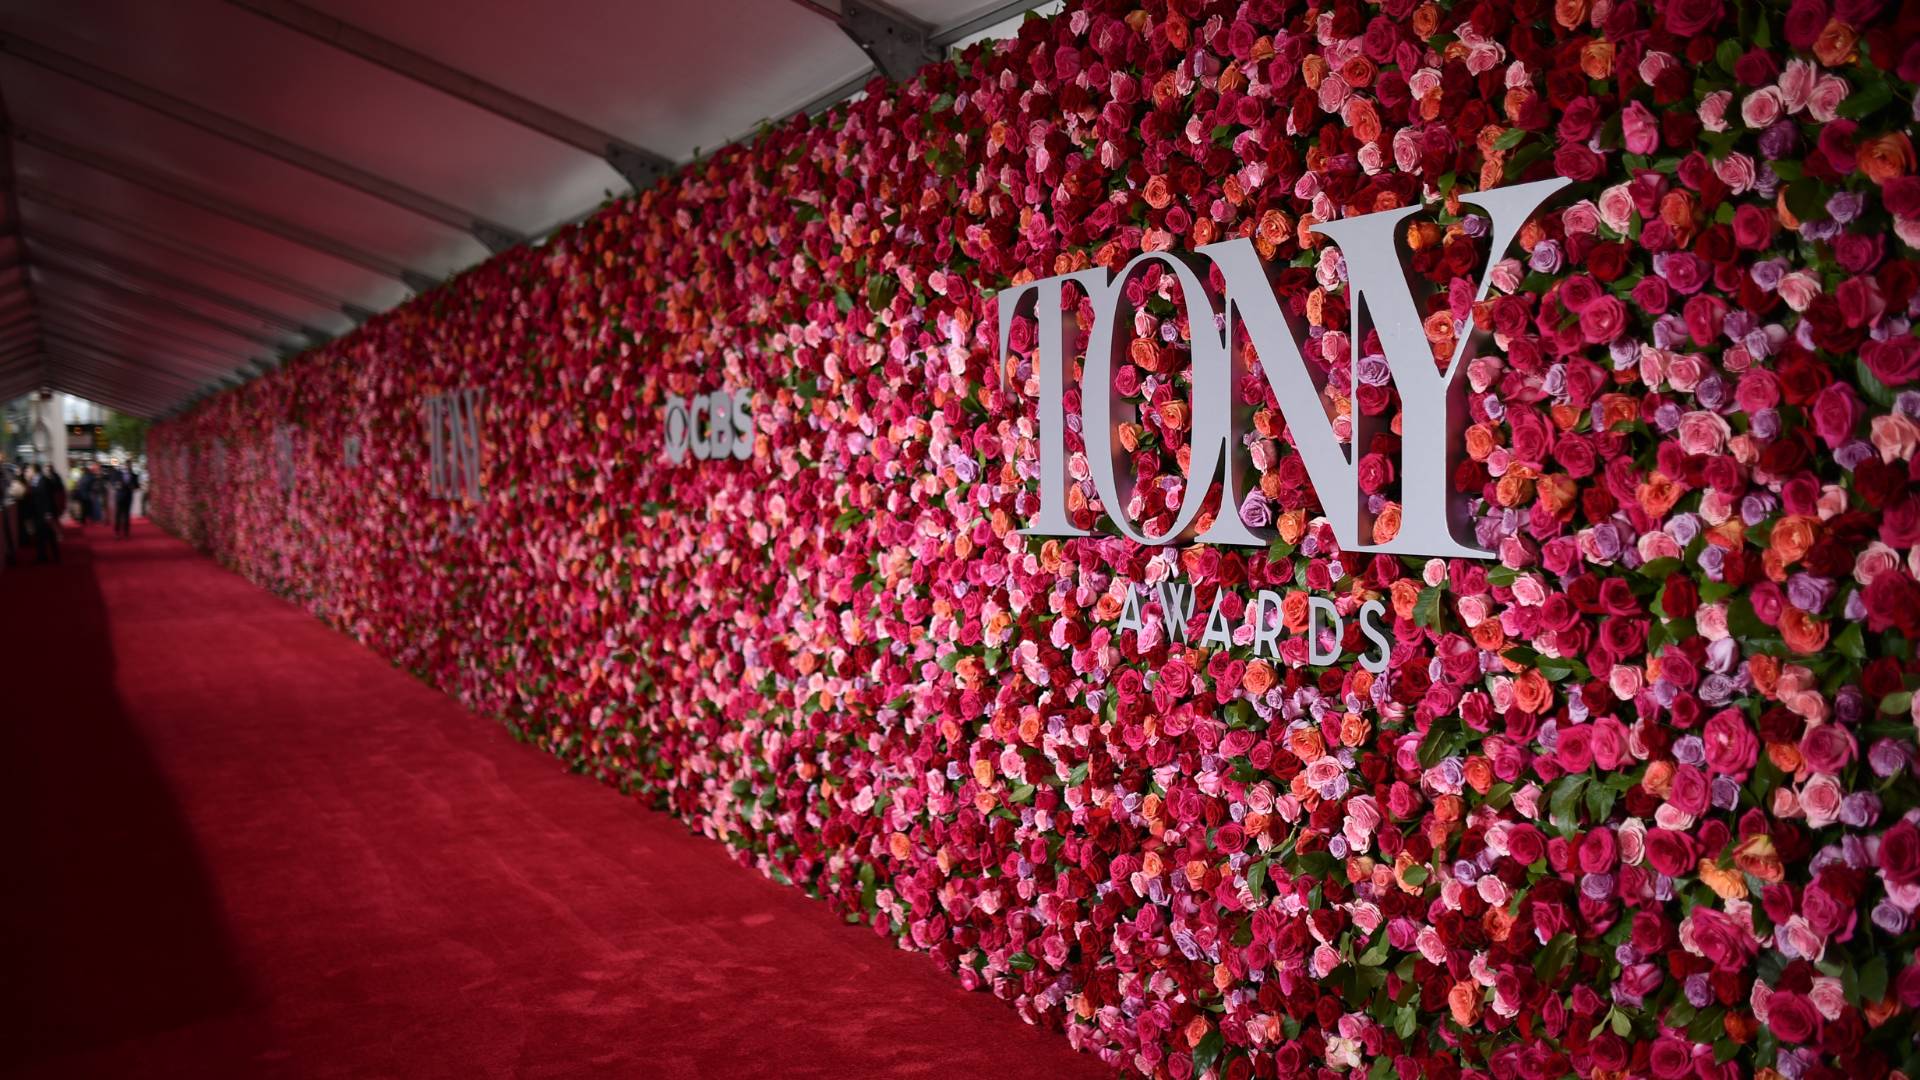 Tony Awards Administration Committee Meets For First Time To Determine